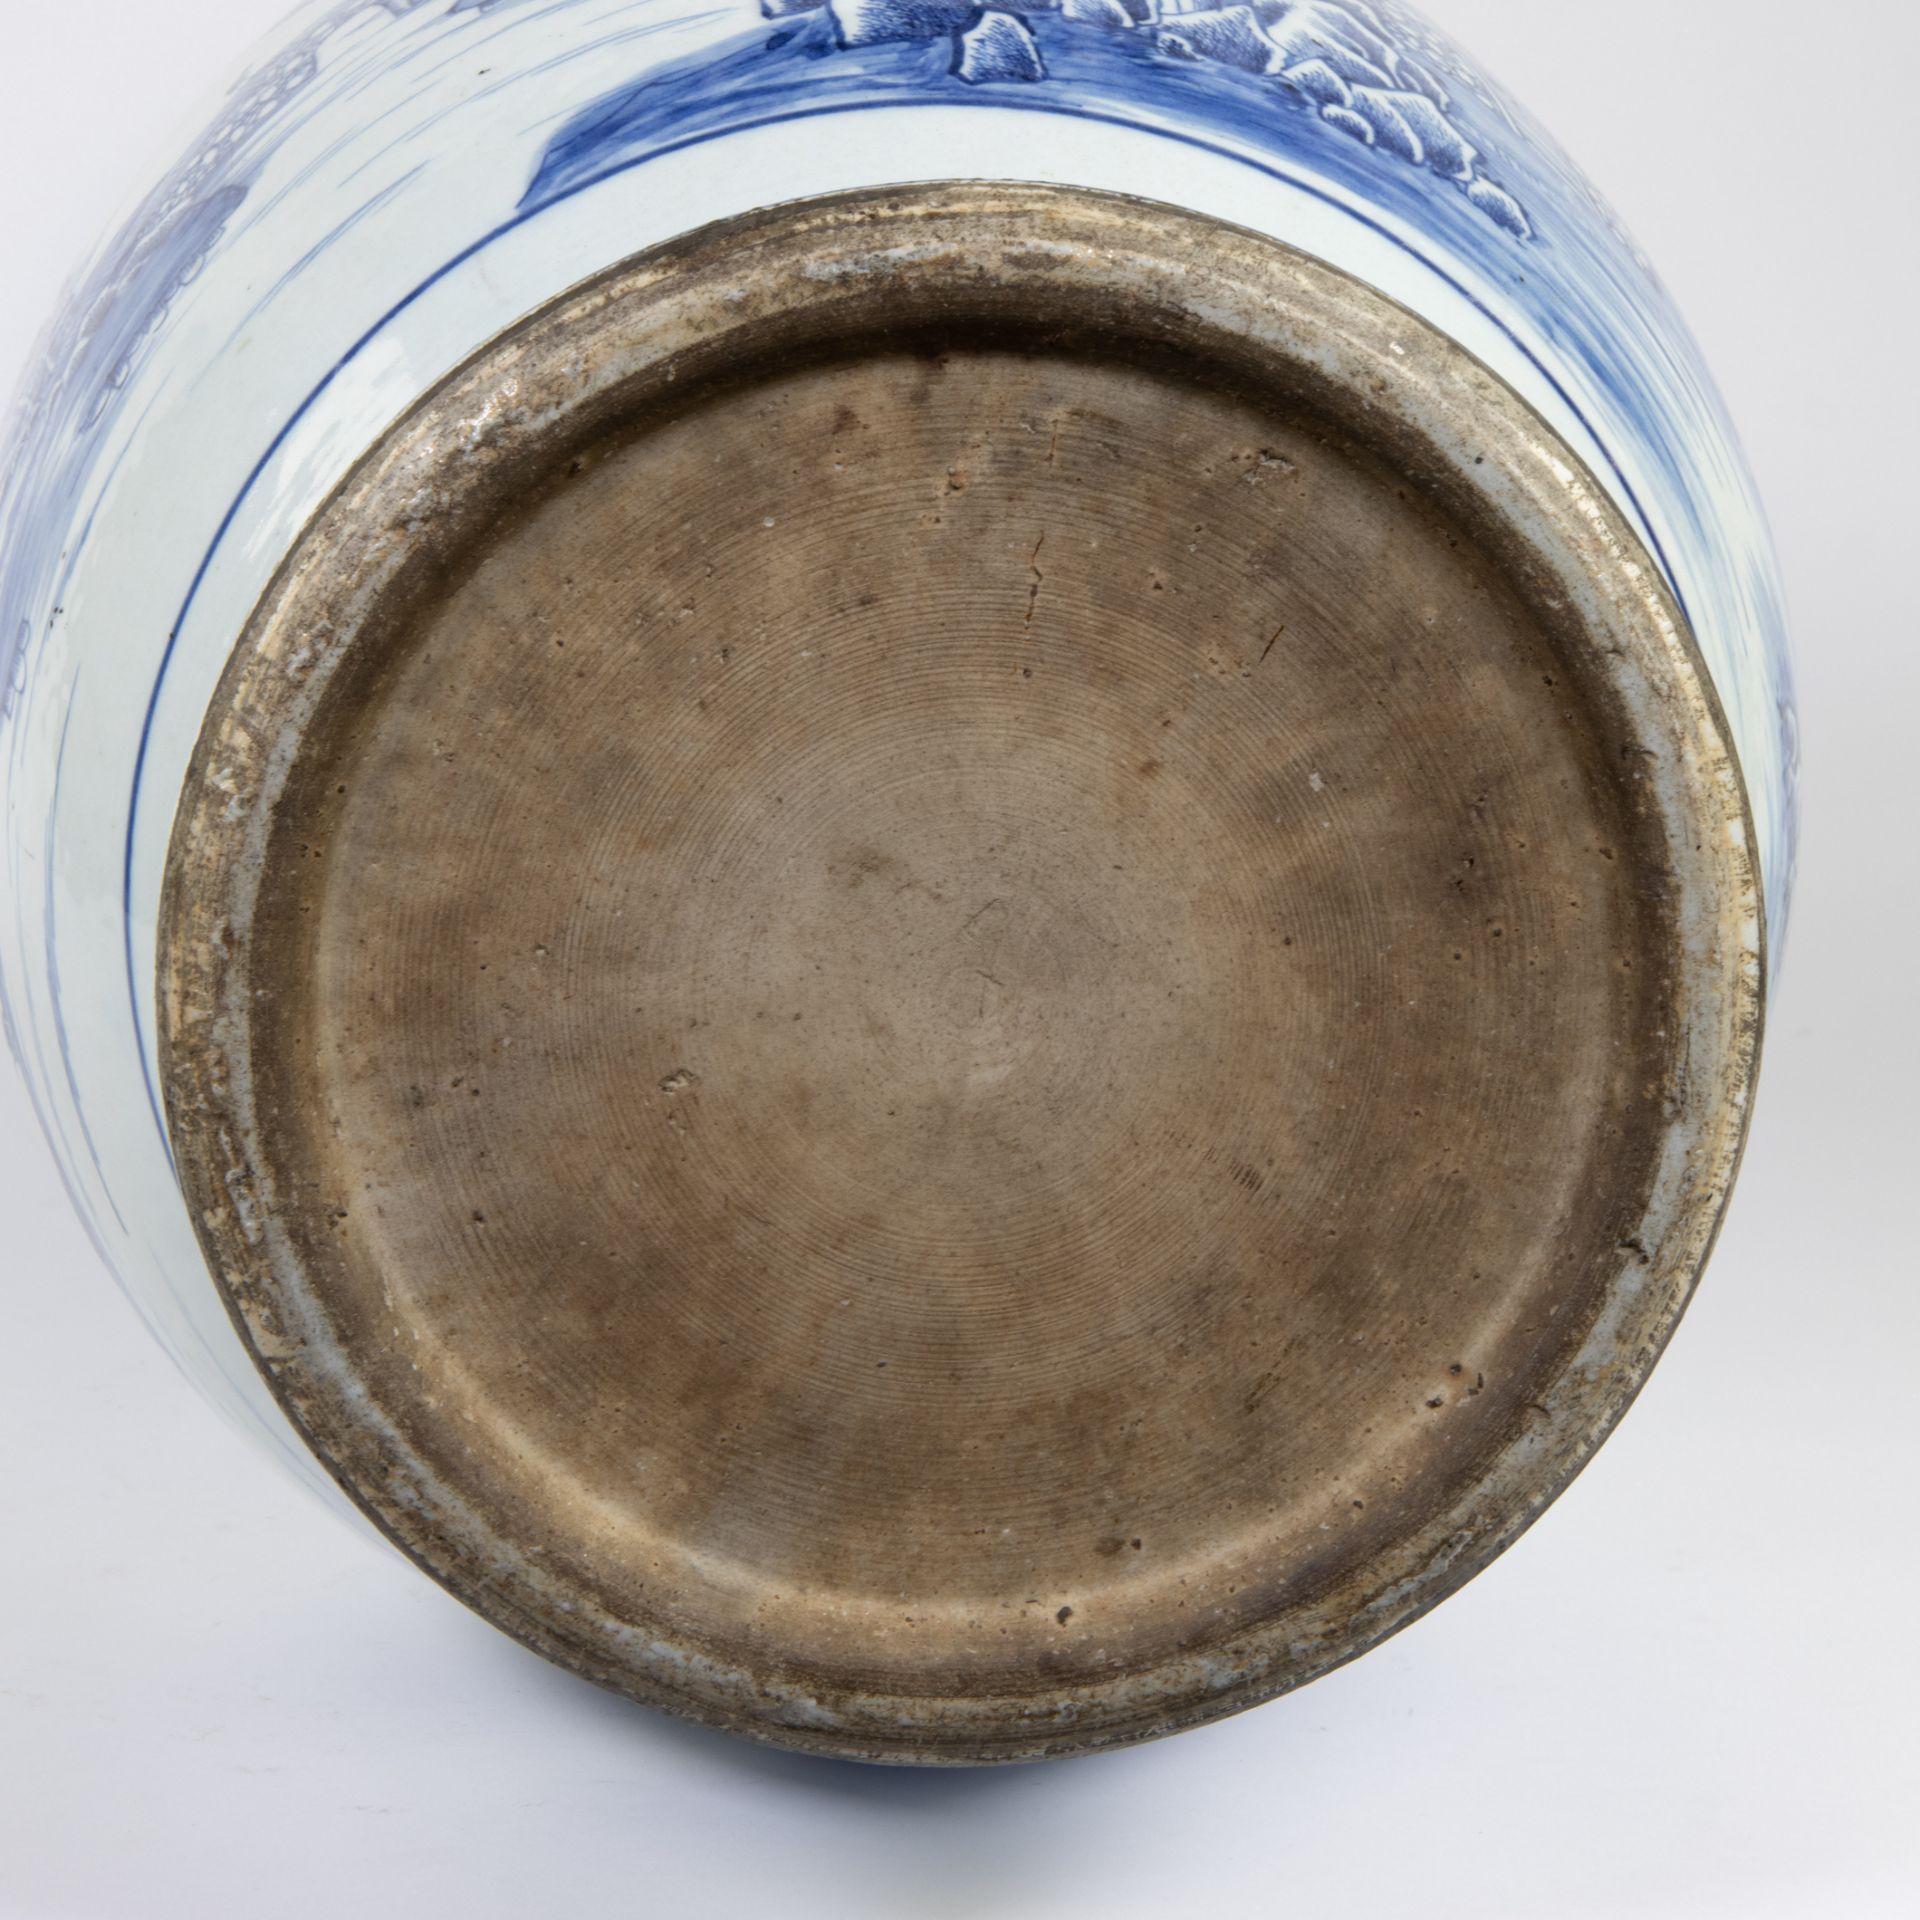 Large Chinese vase blue/white with floral mountain decor, late 19th century - Image 5 of 8